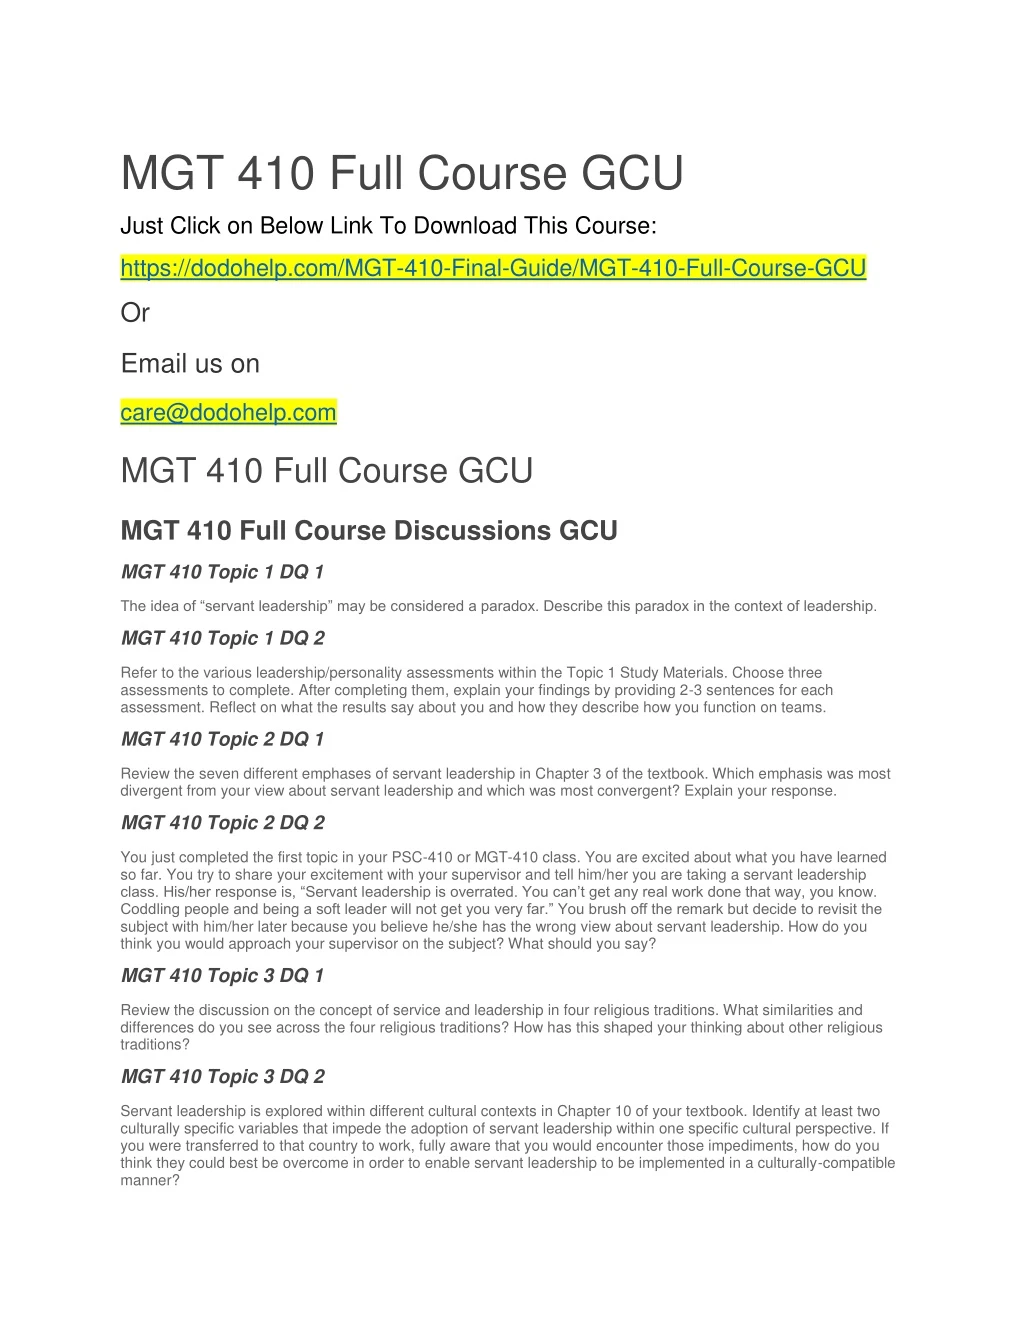 mgt 410 full course gcu just click on below link